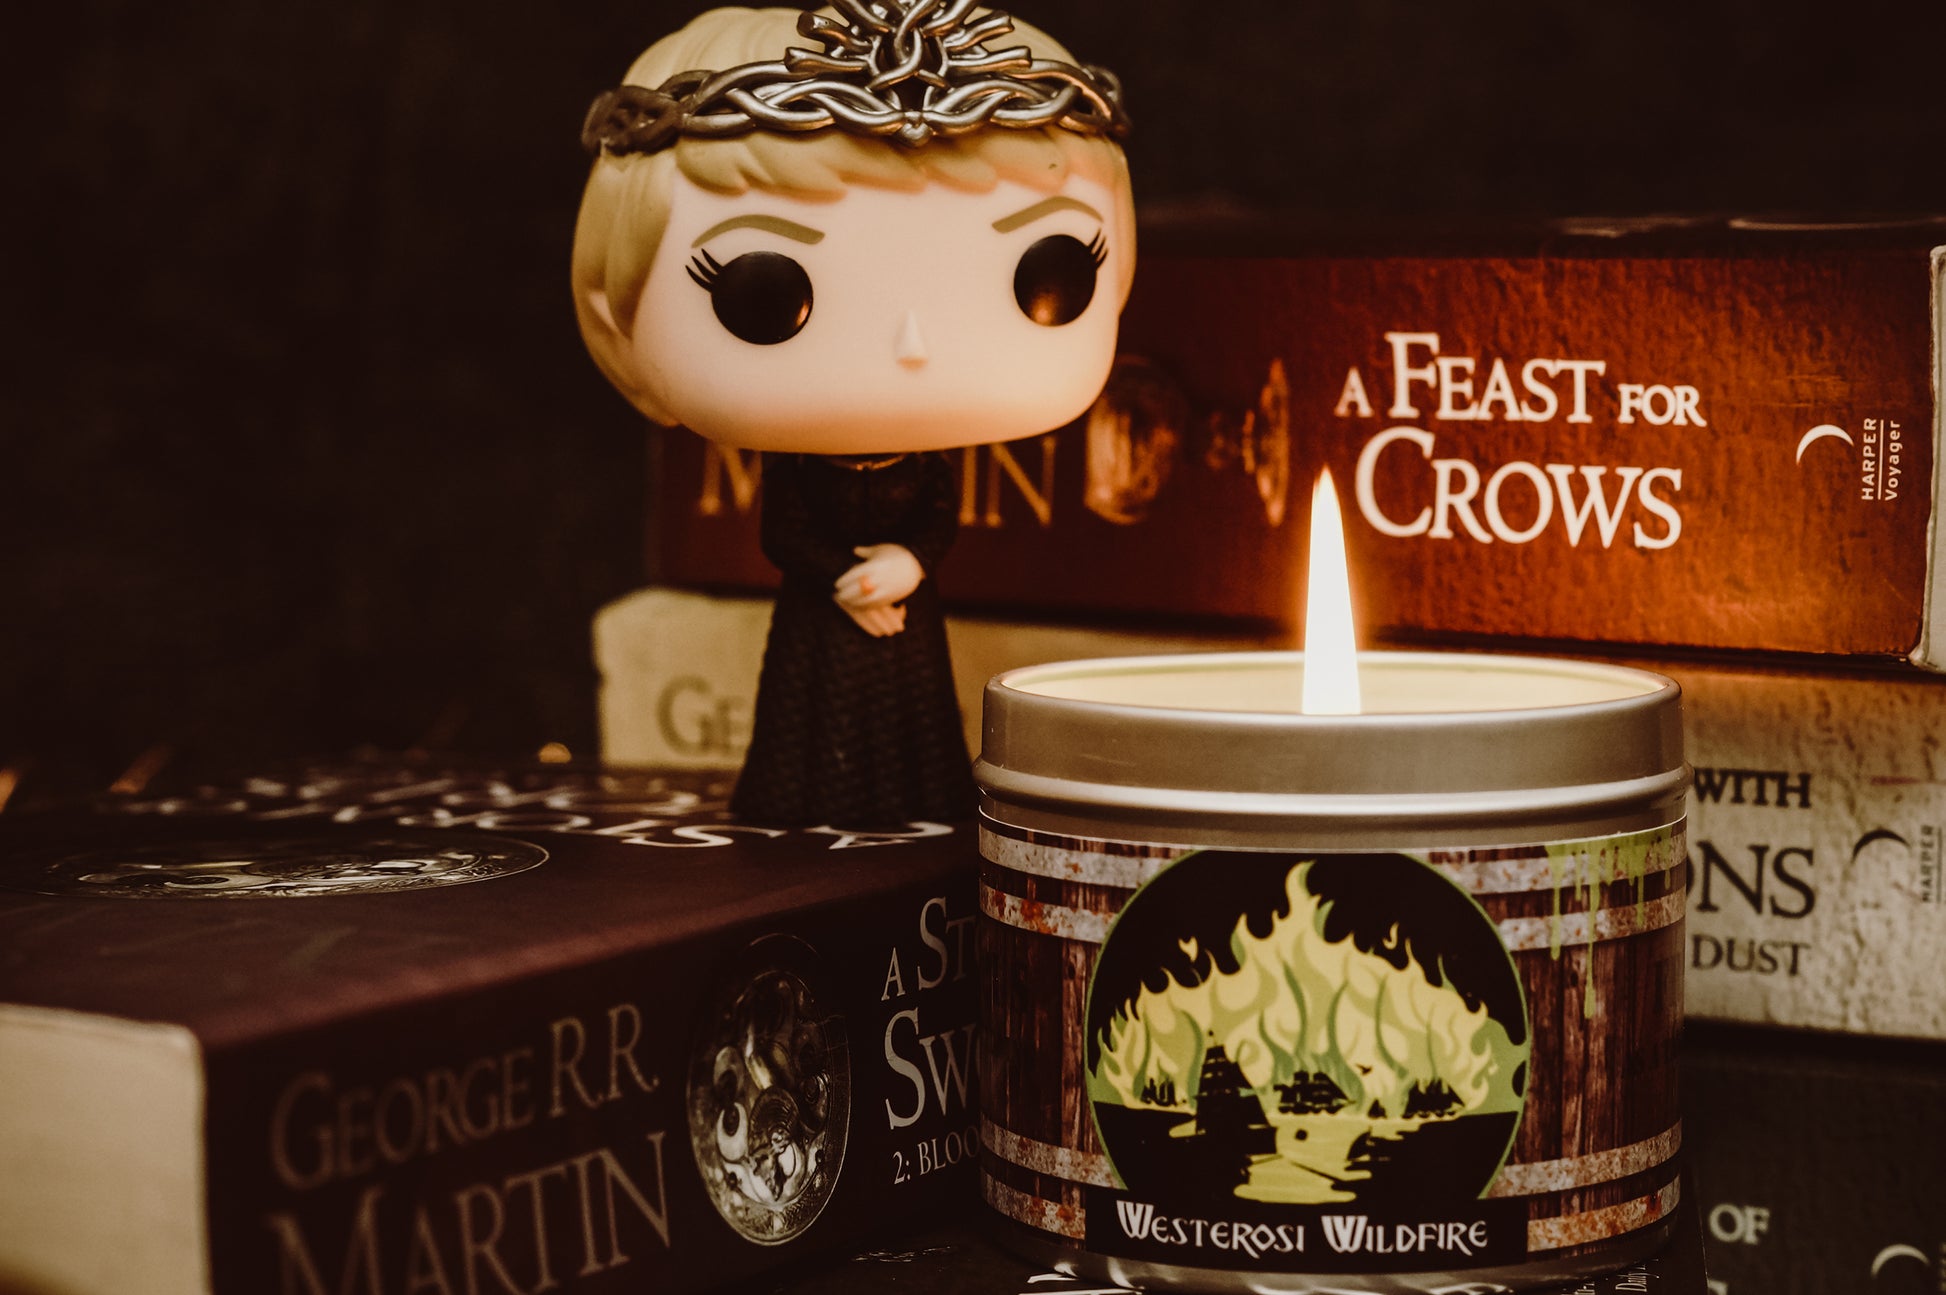 Happy Piranha's Westerosi wildfire scented candle alight by books